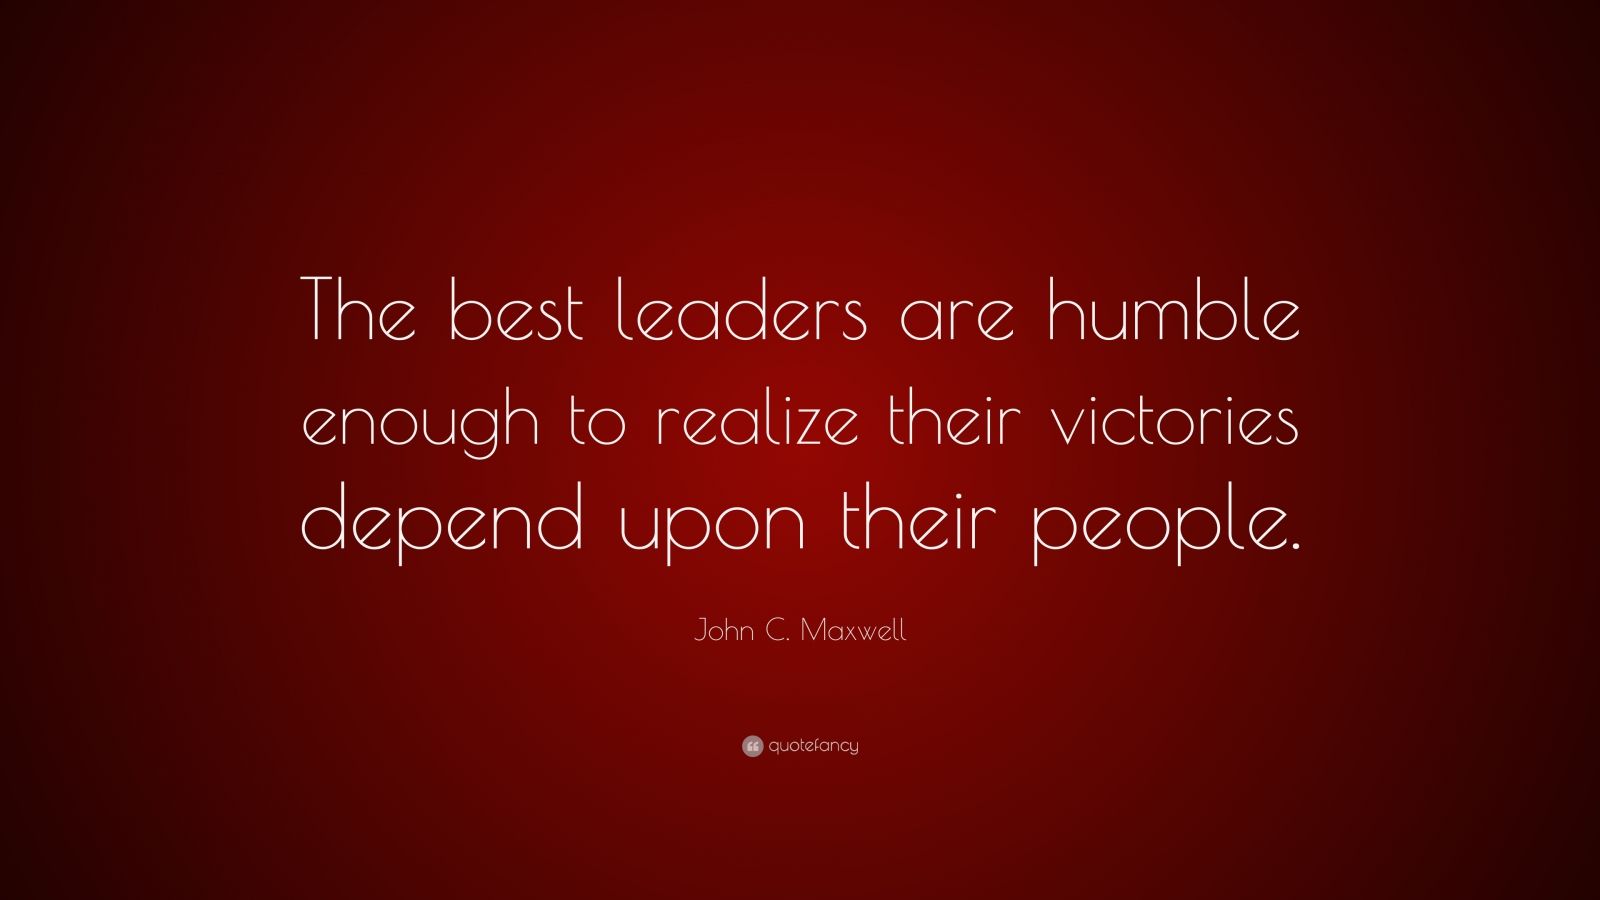 John C. Maxwell Quote: “The best leaders are humble enough to realize ...